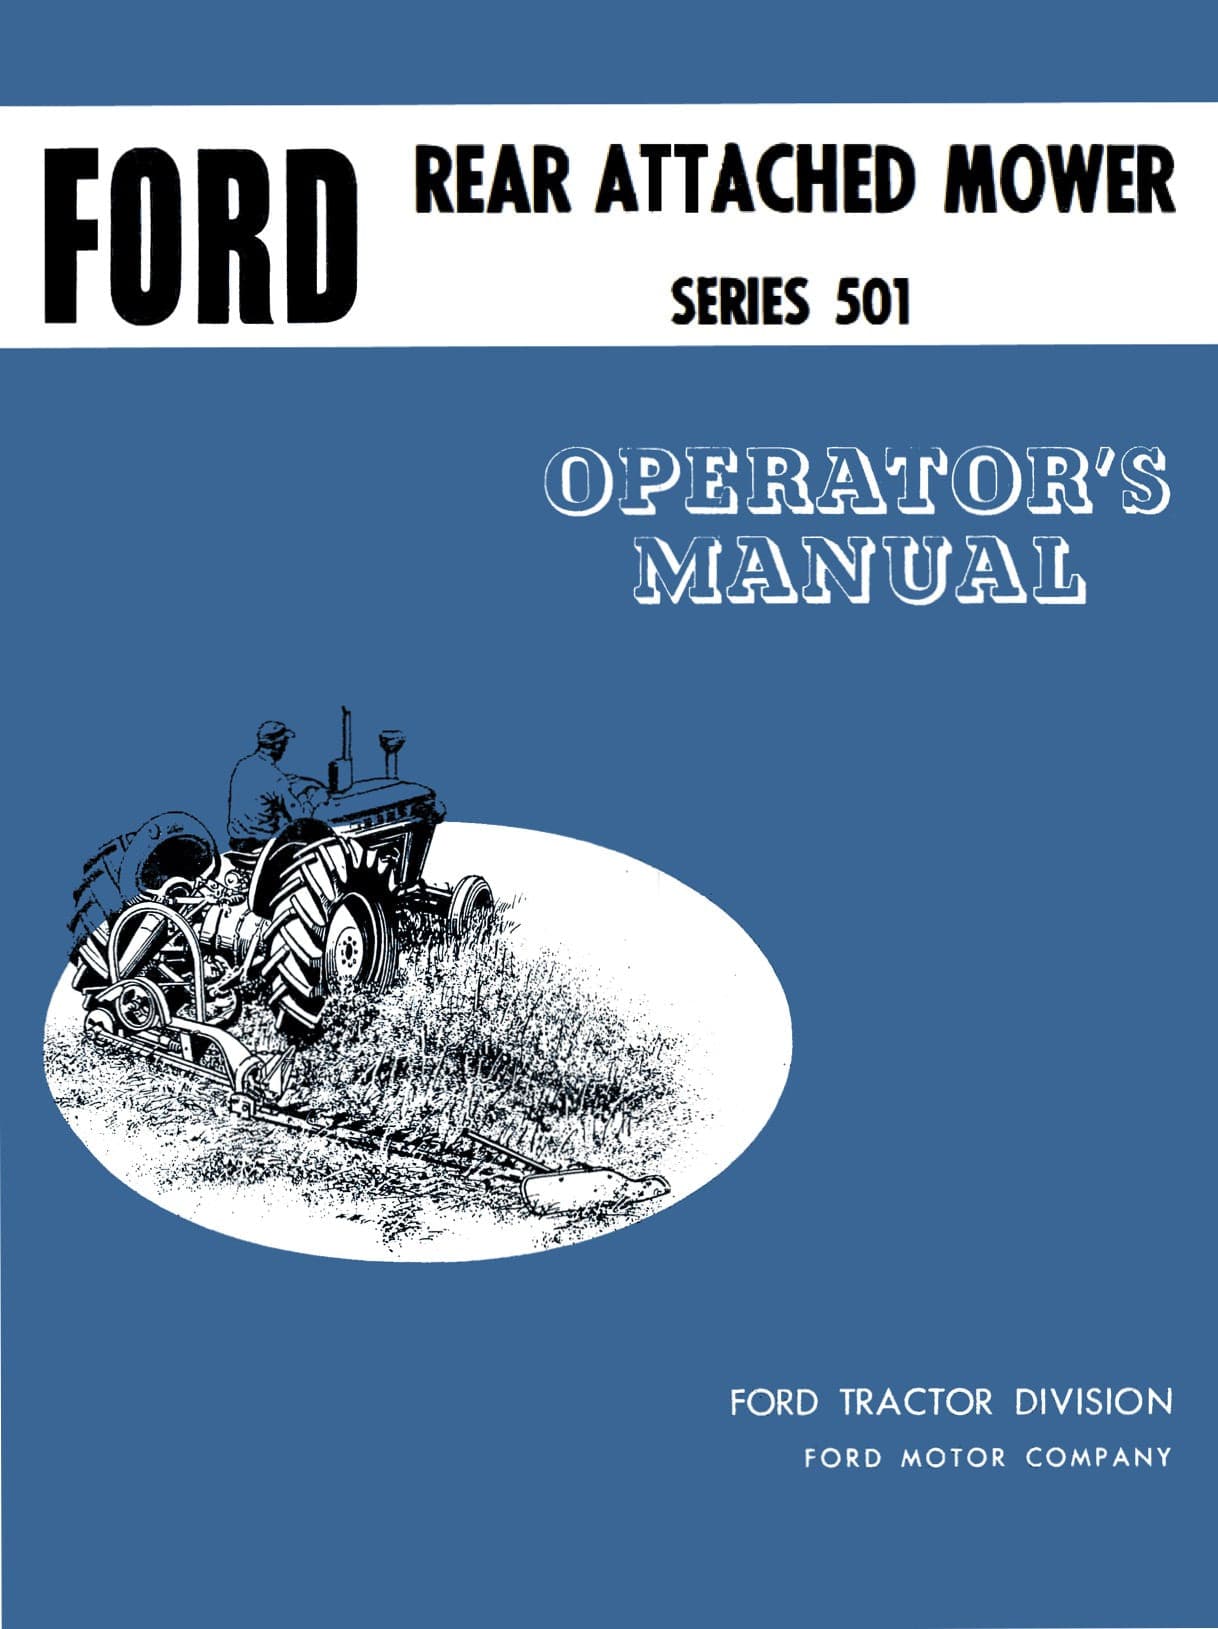 Ford Rear Attached Mower Series 501 - Operator's Manual - Ag Manuals - A Provider of Digital Farm Manuals - 1